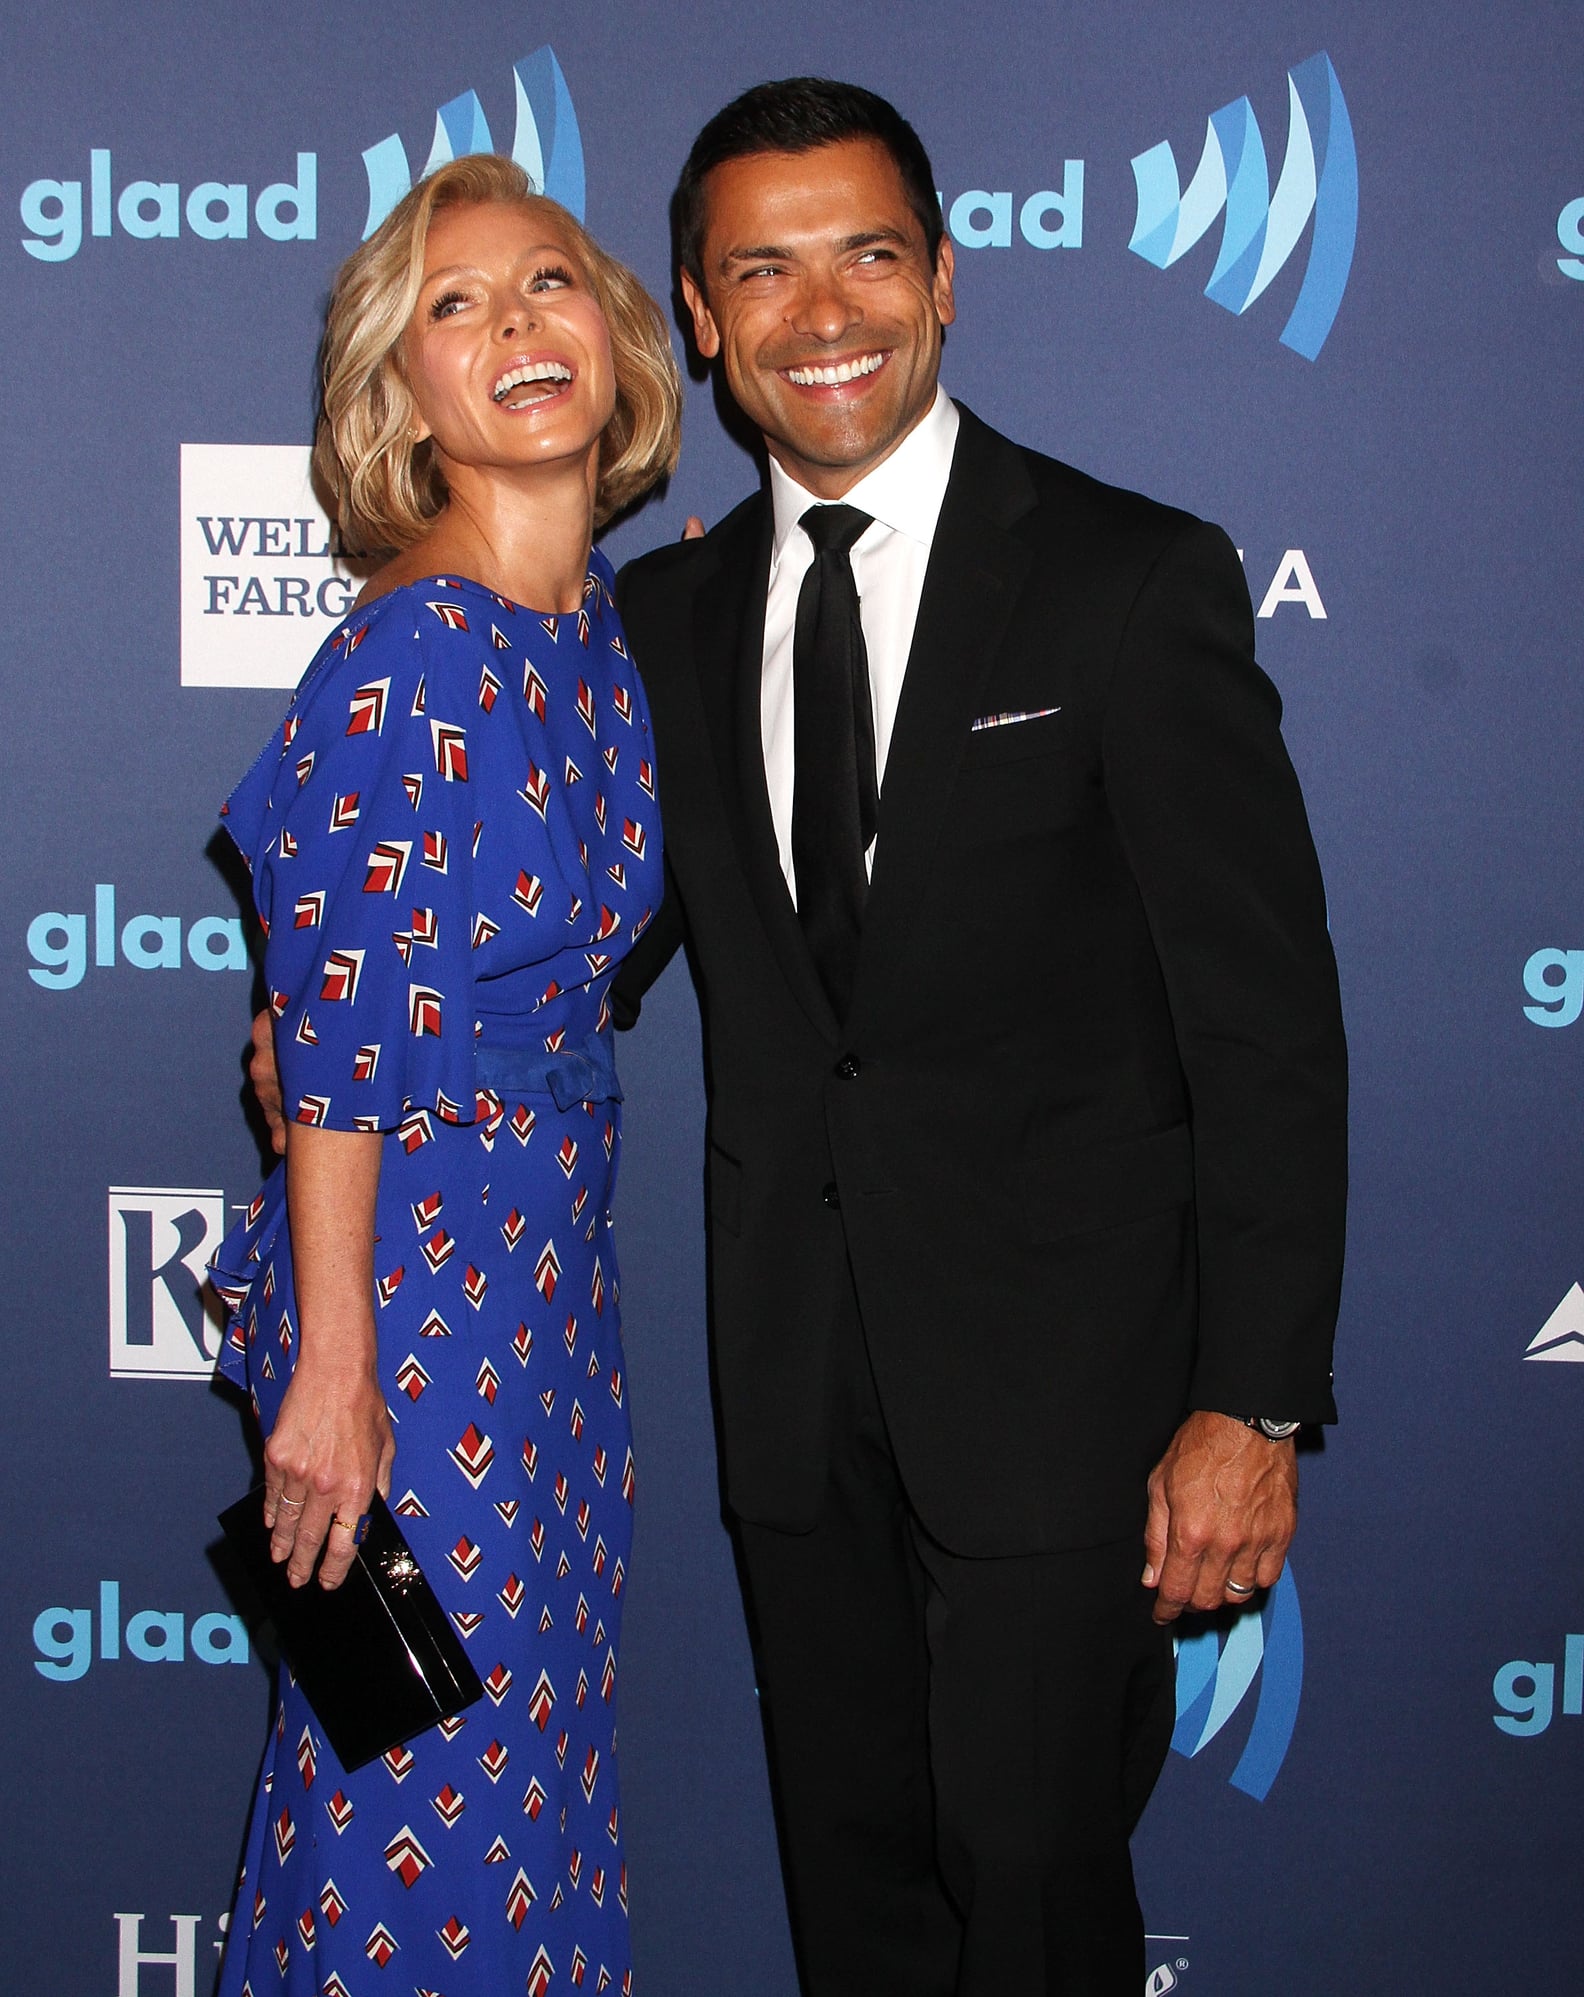 Kelly Ripa and Mark Consuelos Cute Pictures | POPSUGAR Celebrity